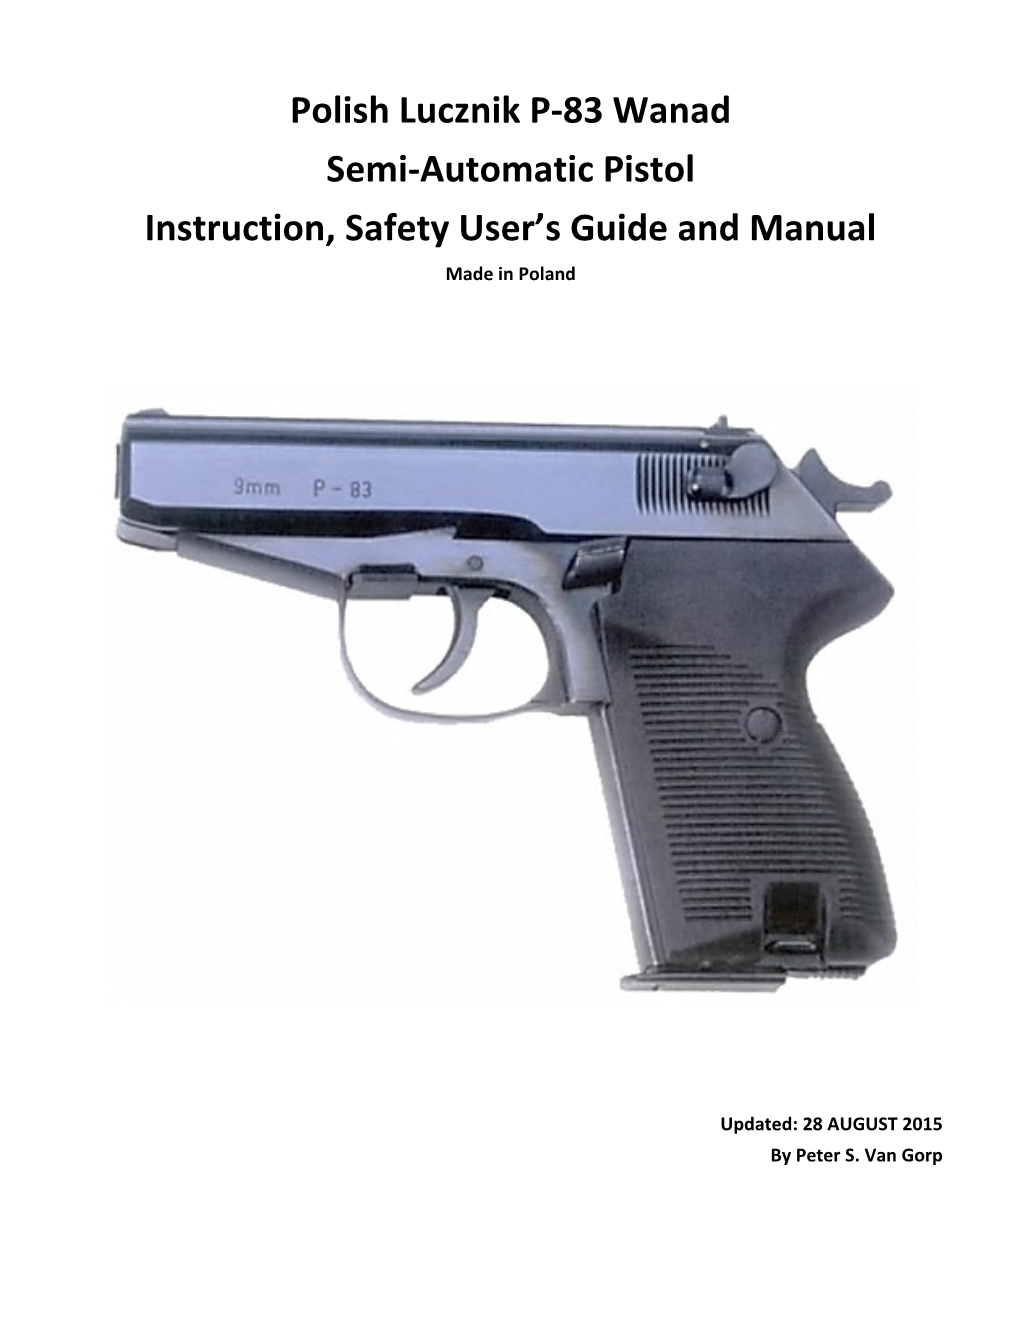 Lucznik P-83 Wanad Pistol Instruction, Safety User's Guide And